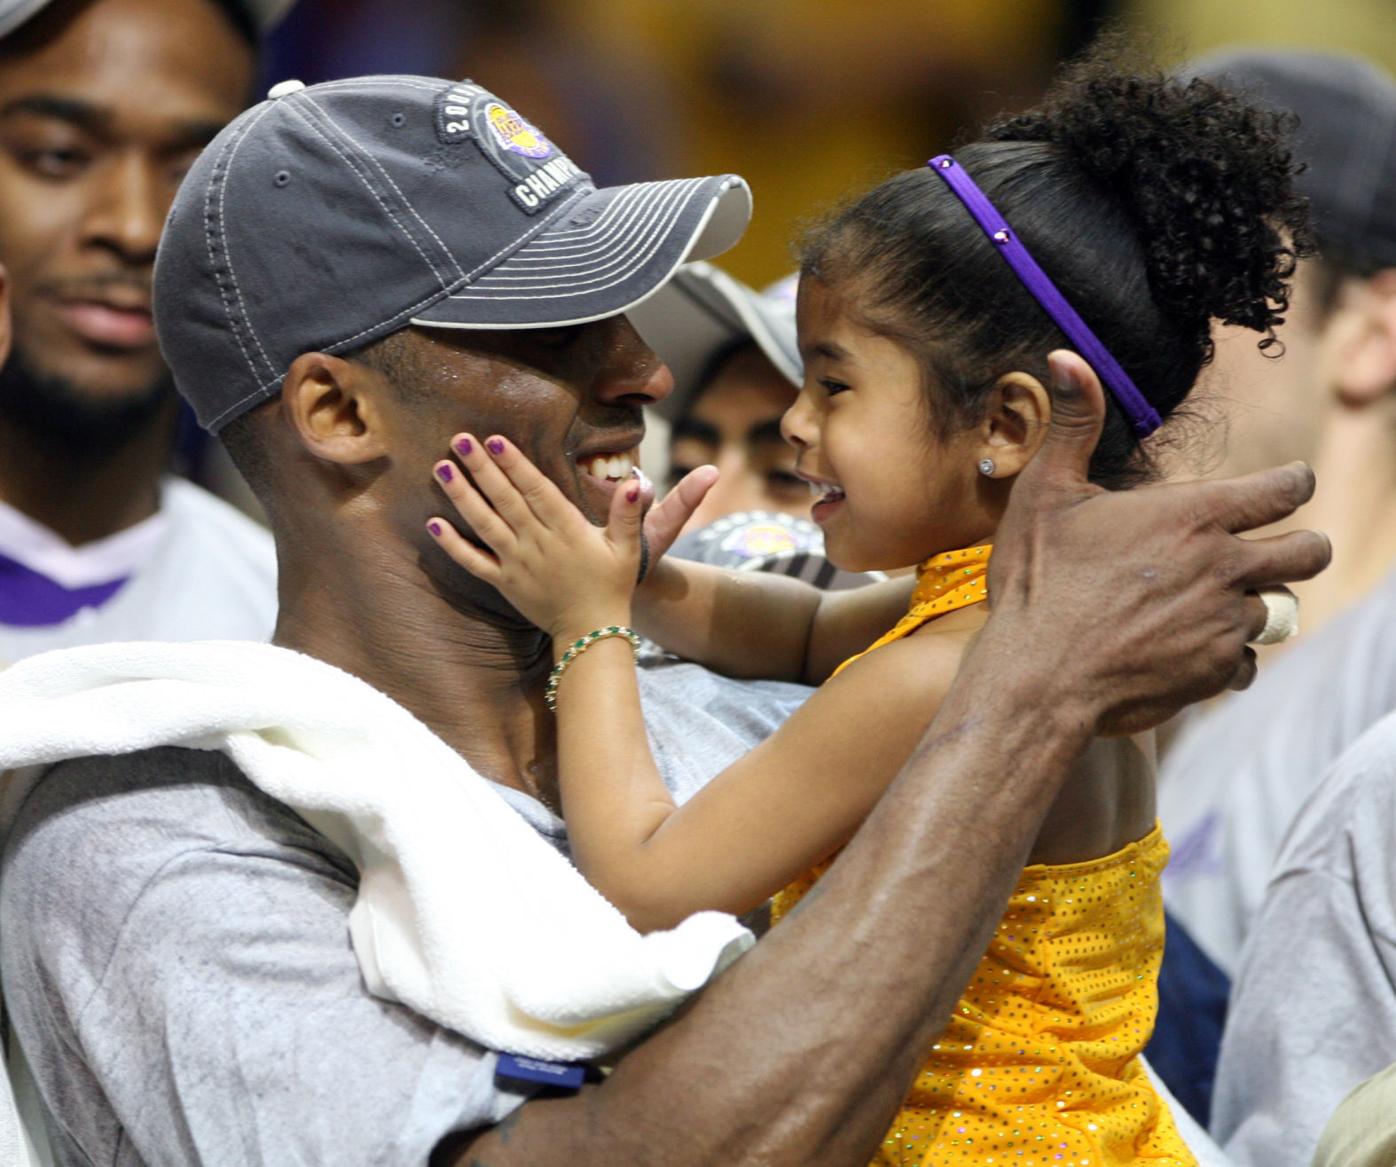 Gianna Bryant, 13, was going to carry on her father Kobe's